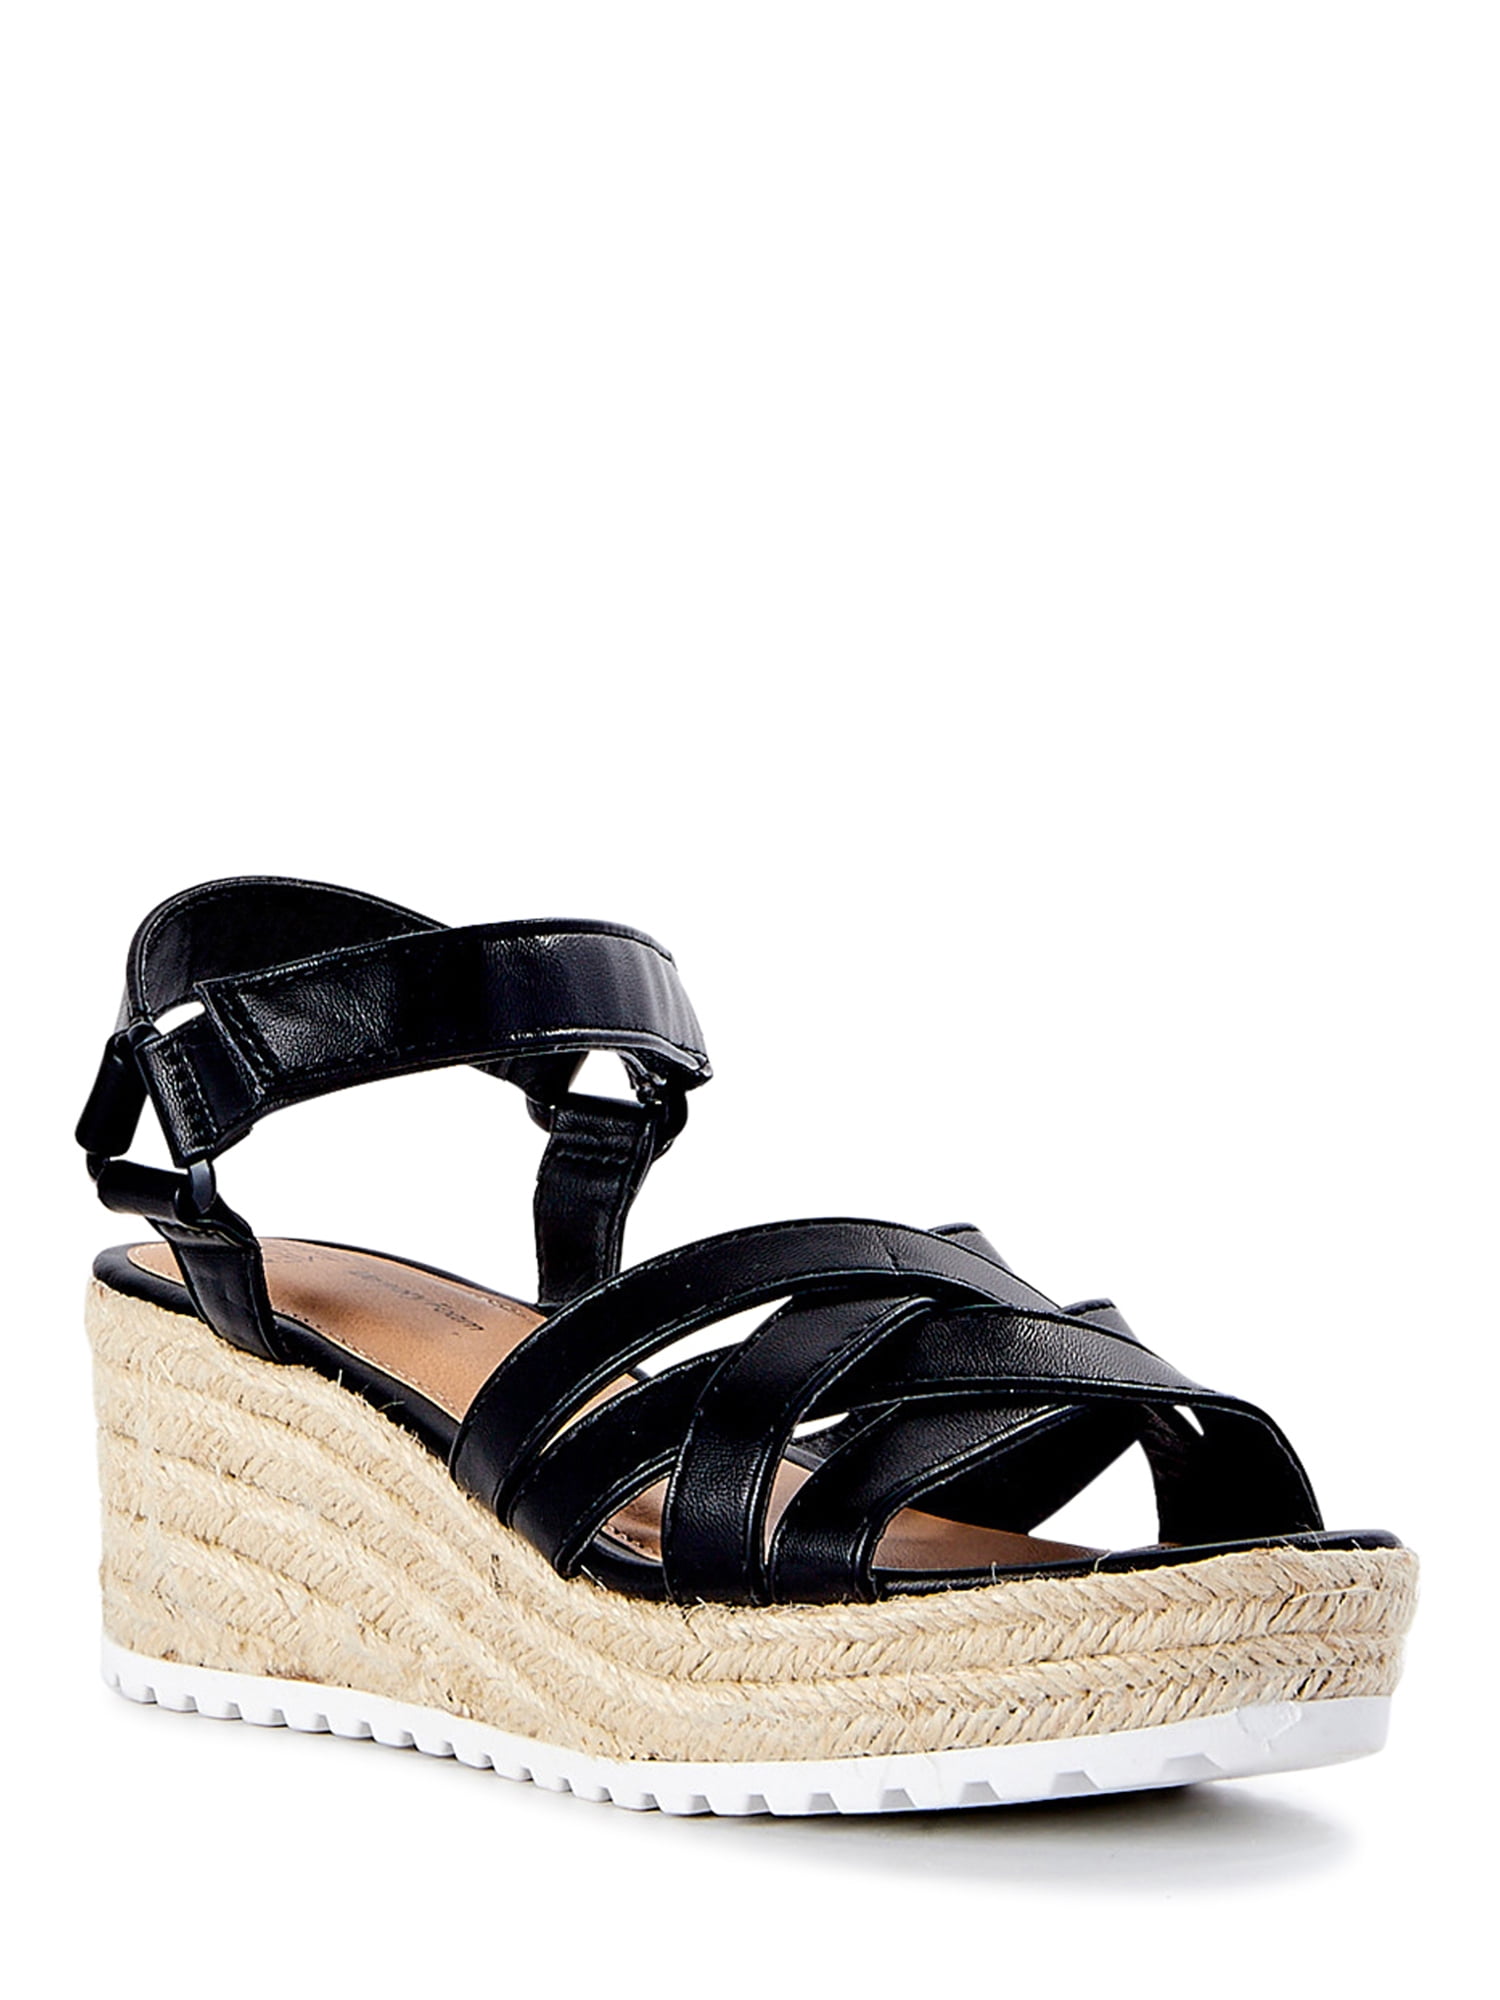 Cato Fashions Clearance Wedges